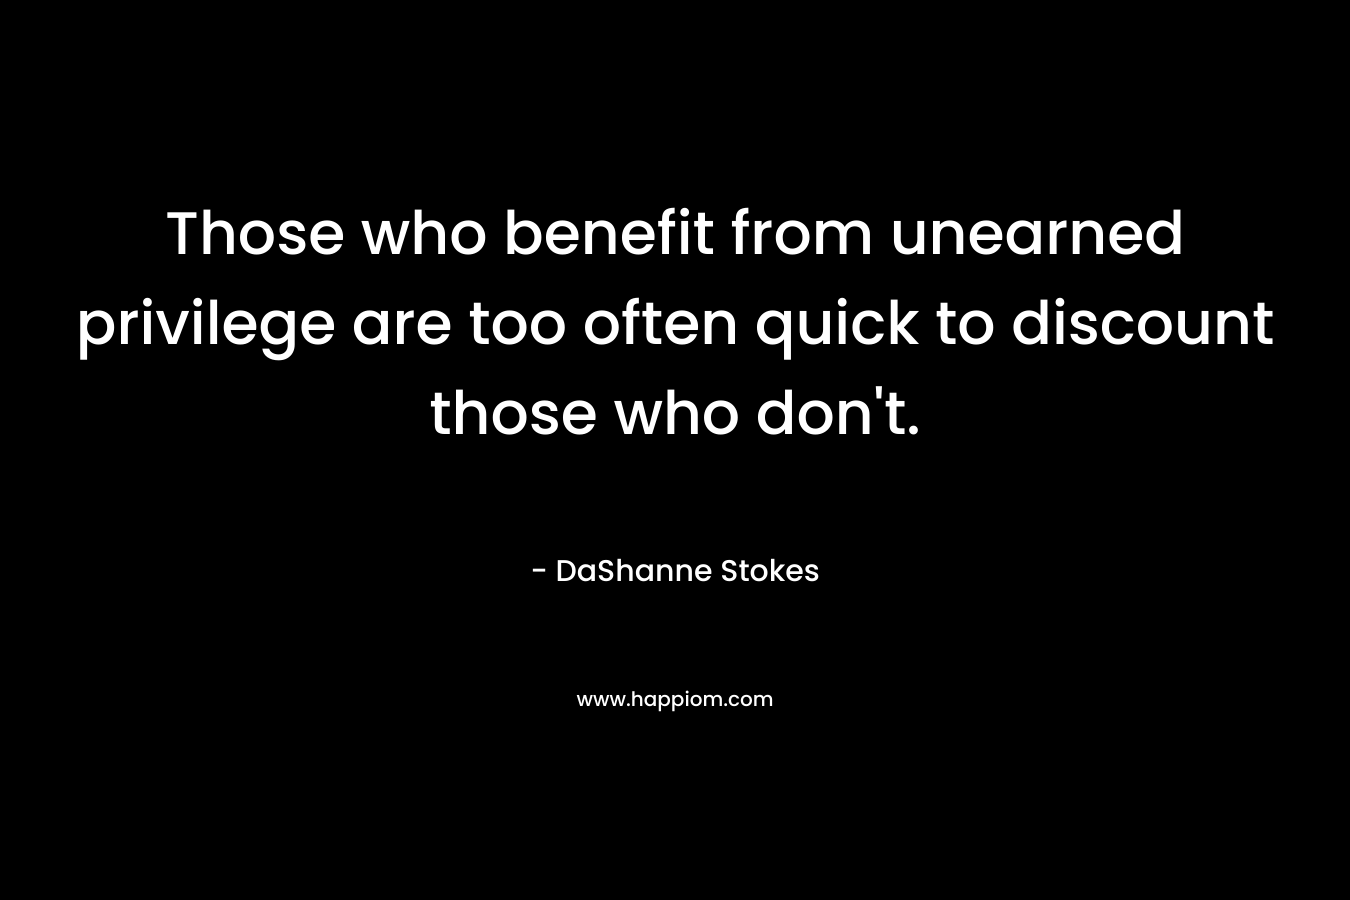 Those who benefit from unearned privilege are too often quick to discount those who don’t. – DaShanne Stokes